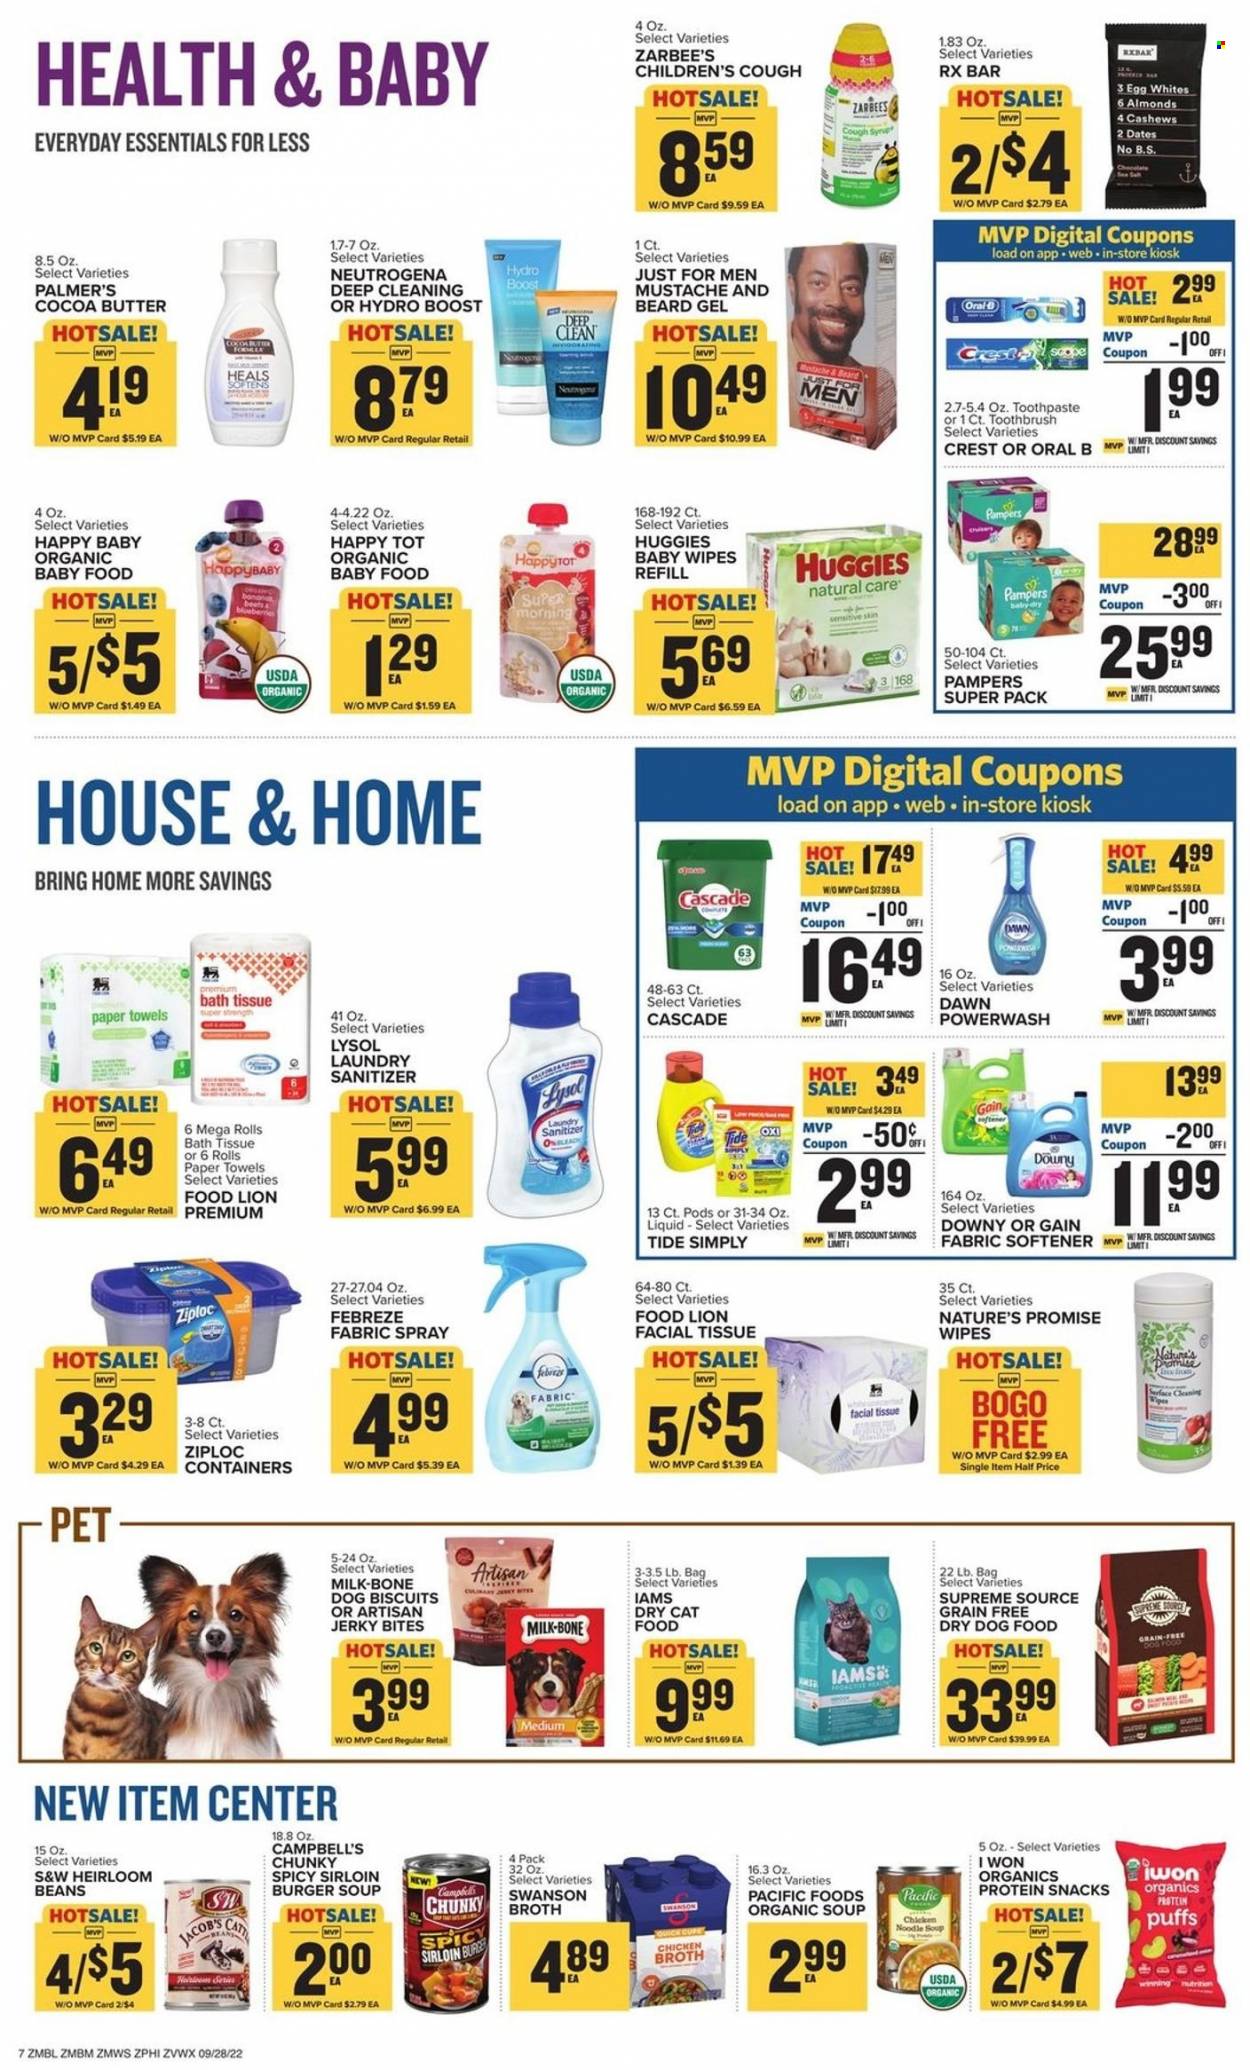 thumbnail - Food Lion Flyer - 09/28/2022 - 10/04/2022 - Sales products - Nature’s Promise, puffs, beans, blueberries, Campbell's, soup, hamburger, noodles cup, noodles, jerky, milk, eggs, snack, chicken broth, broth, syrup, Boost, organic baby food, wipes, Huggies, Pampers, baby wipes, bath tissue, kitchen towels, paper towels, Febreze, Gain, Lysol, Cascade, Tide, fabric softener, toothbrush, Oral-B, toothpaste, Crest, Neutrogena, Ziploc, animal food, dry dog food, animal treats, cat food, dog food, dog biscuits, dry cat food, Iams. Page 7.